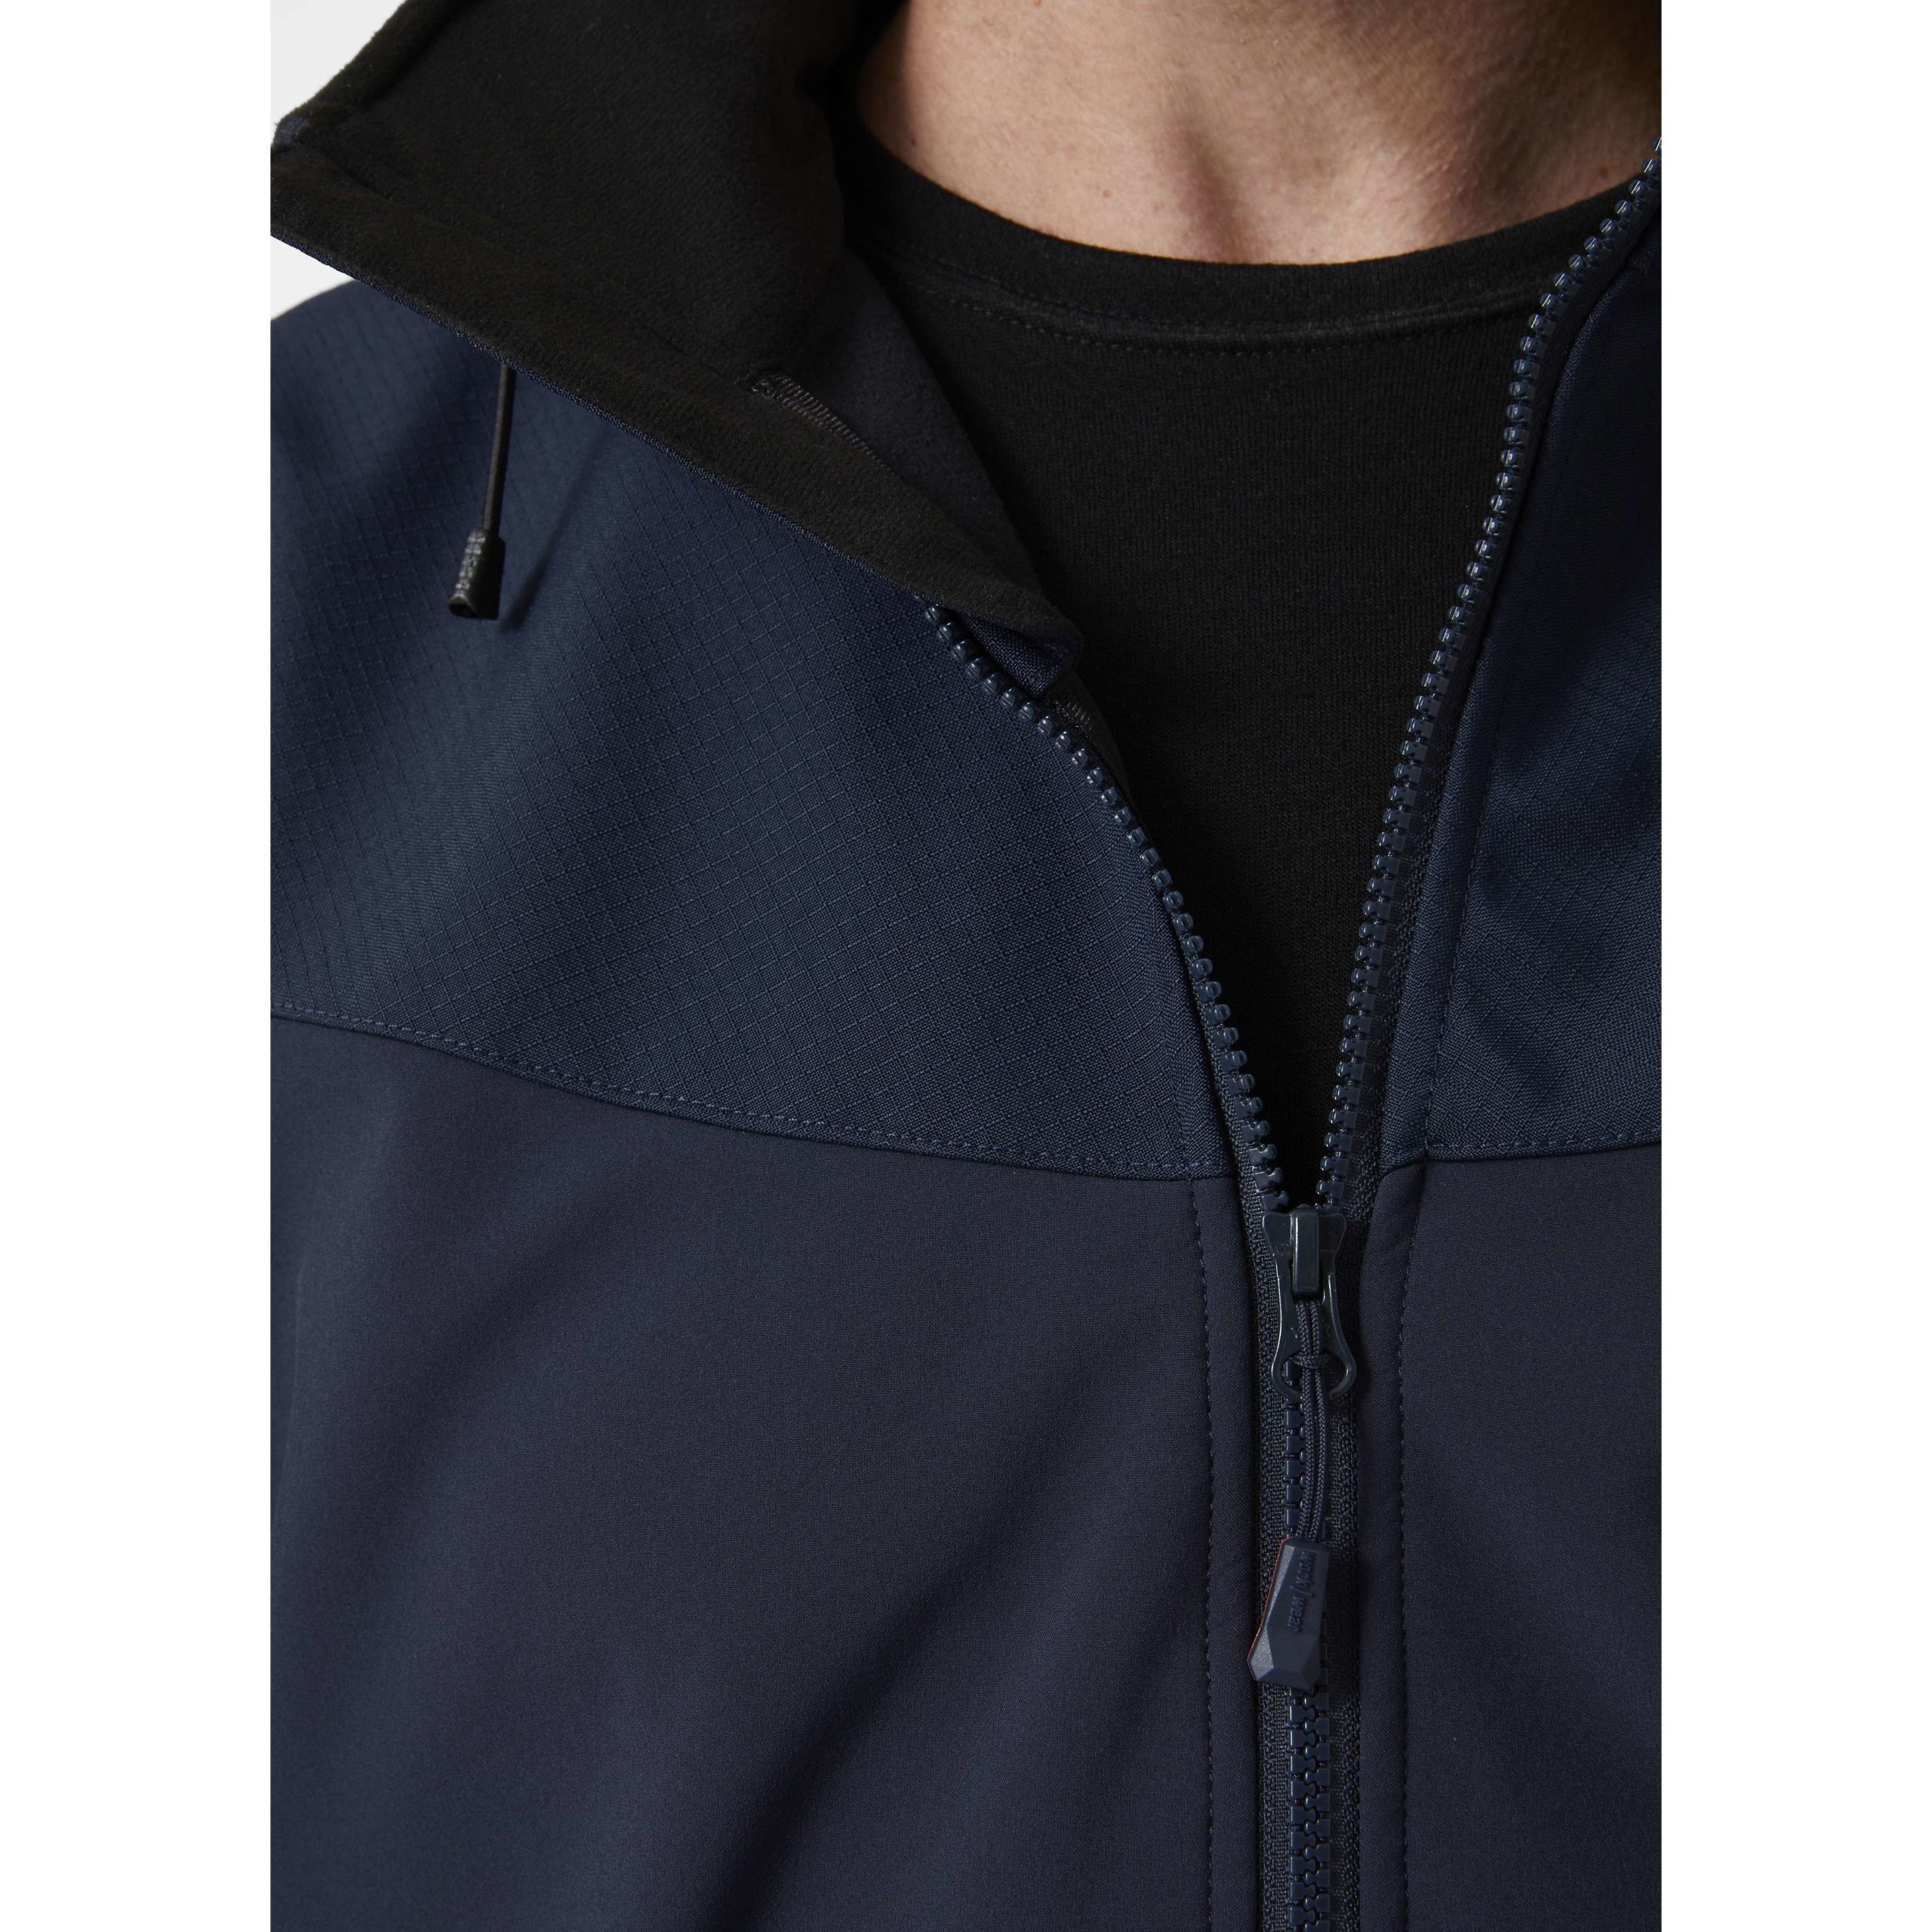 OXFORD Shell Jacket - Helly Tech Performance - Articulated Sleeves - YKK  Zippers - Helly Hansen - iWantWorkwear